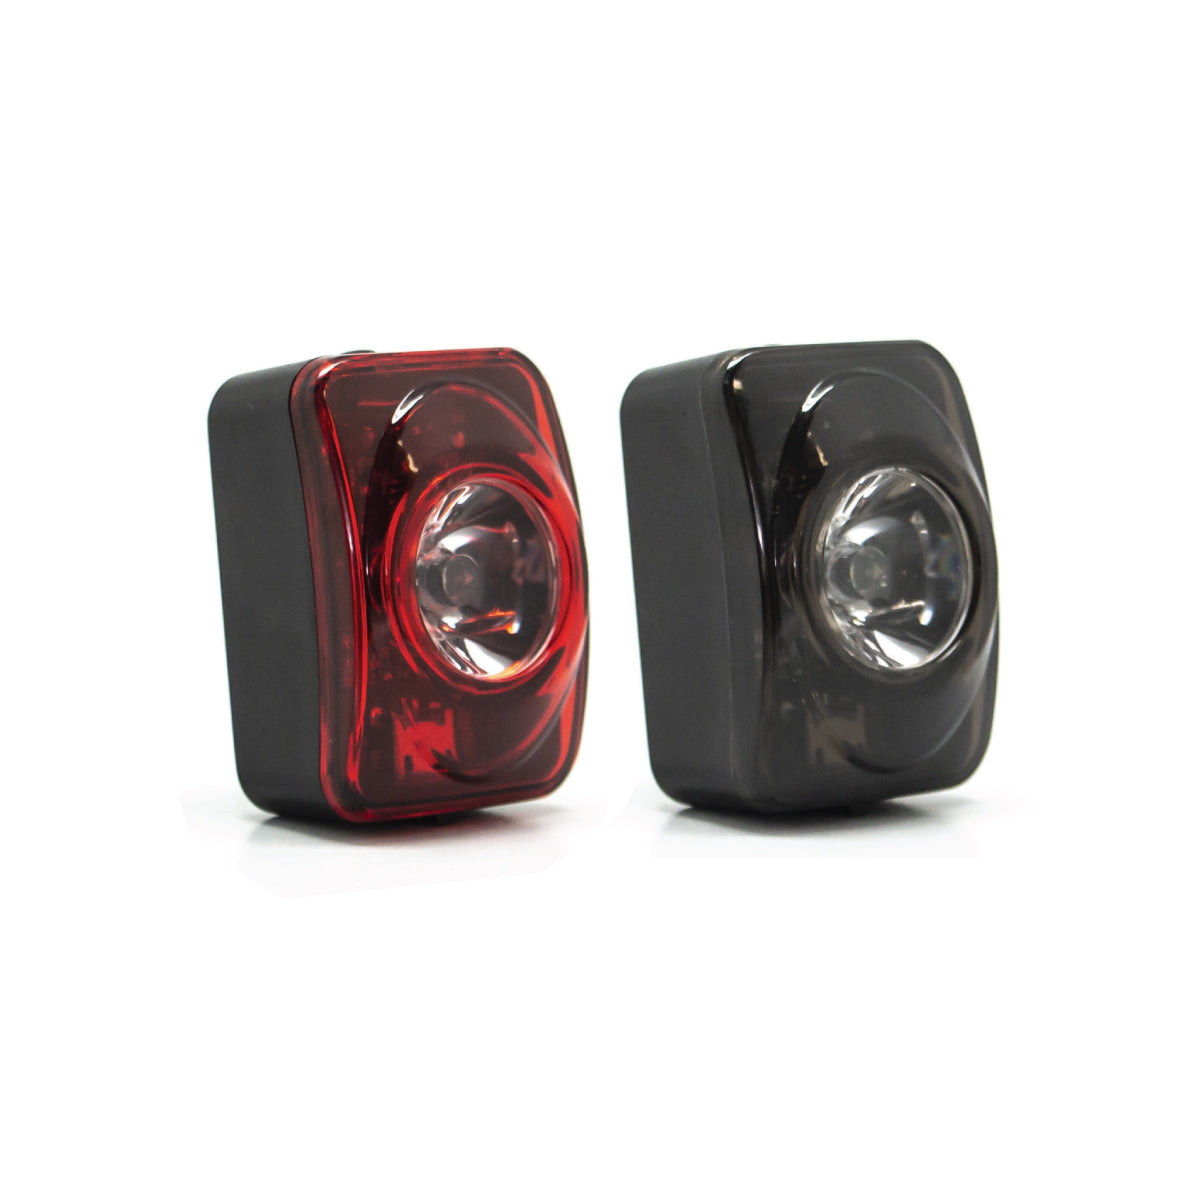 Bicycle front & rear Light set Ryder Cycling